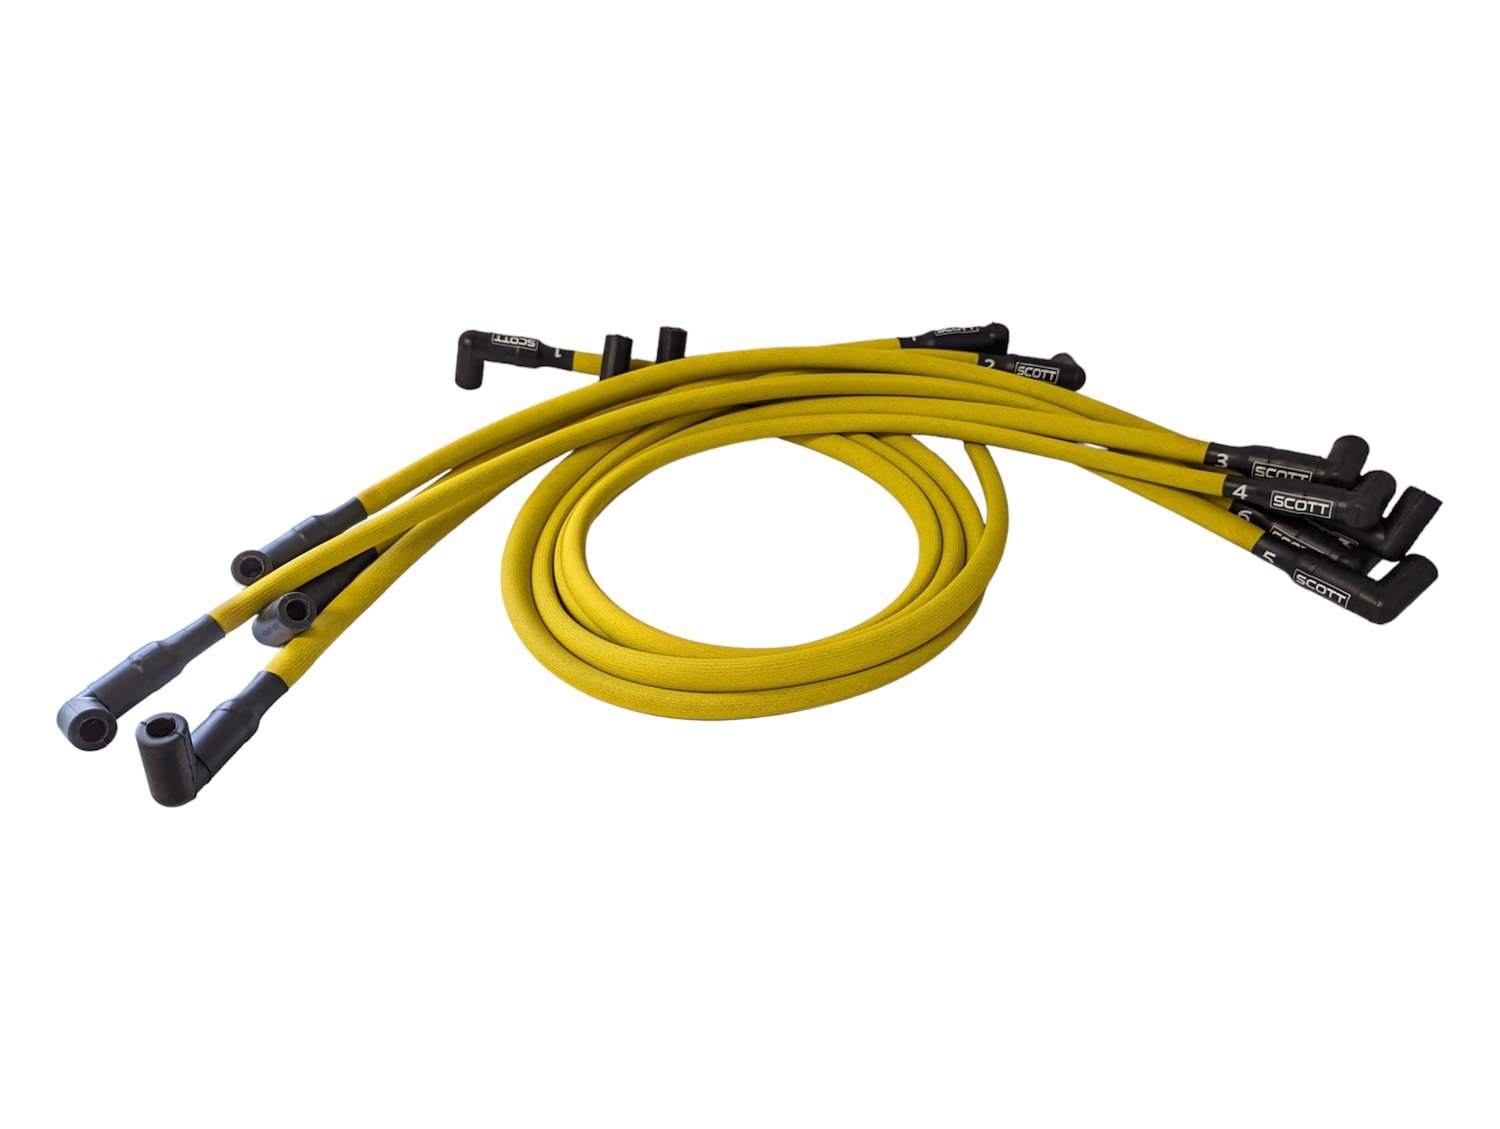 SPW300-PS-516-5 Super Mag Fiberglass-Oversleeved Spark Plug Wire Set for Big Block Chevy Dragster, Under Header [Yellow]